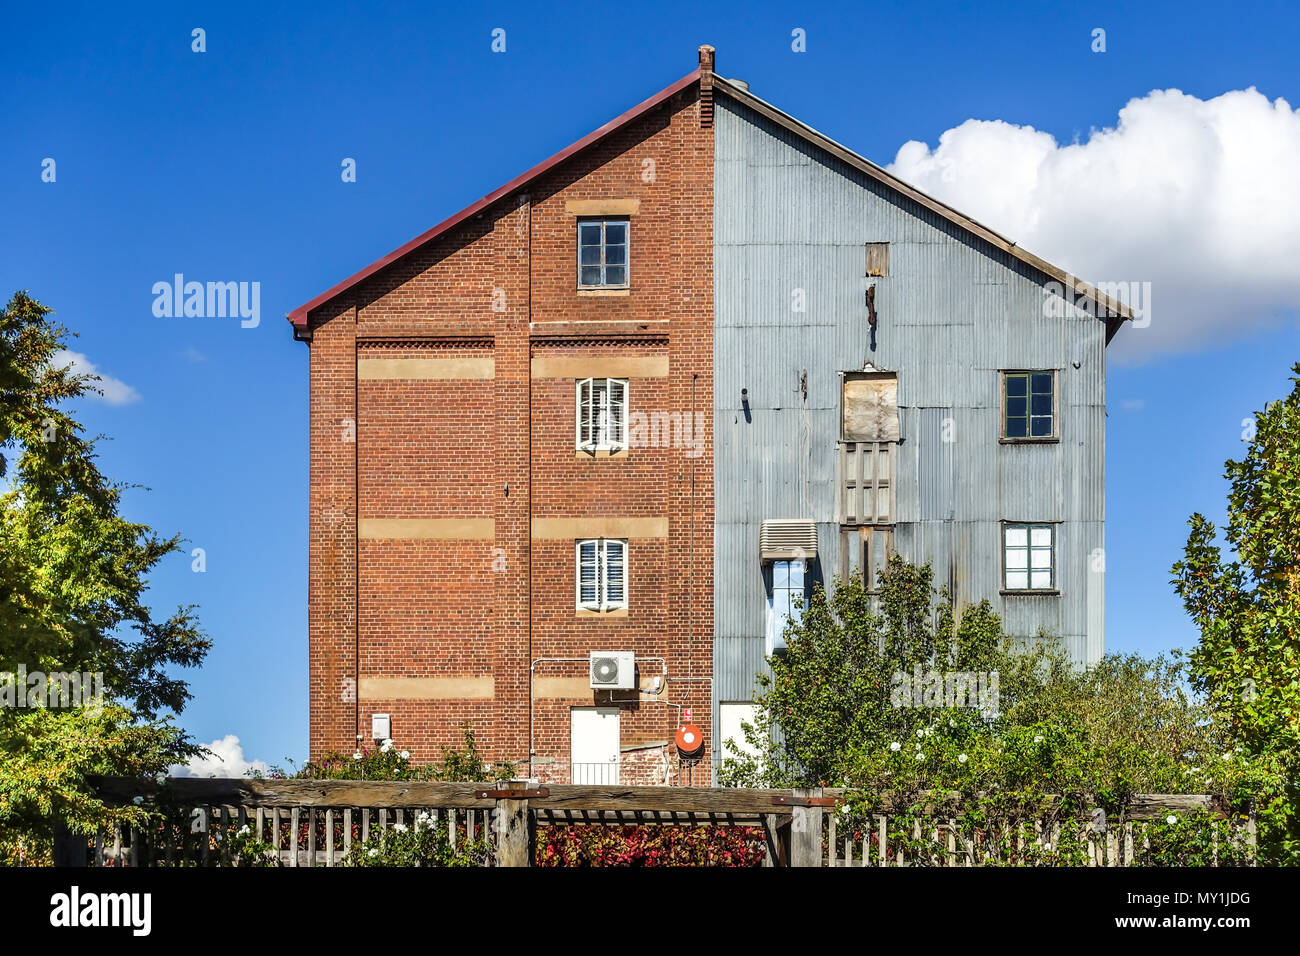 The building of Junee Licorice and Chocolate Factory - a historical landmark and popular tourist attraction in the rural town of Junee. NSW Australia Stock Photo